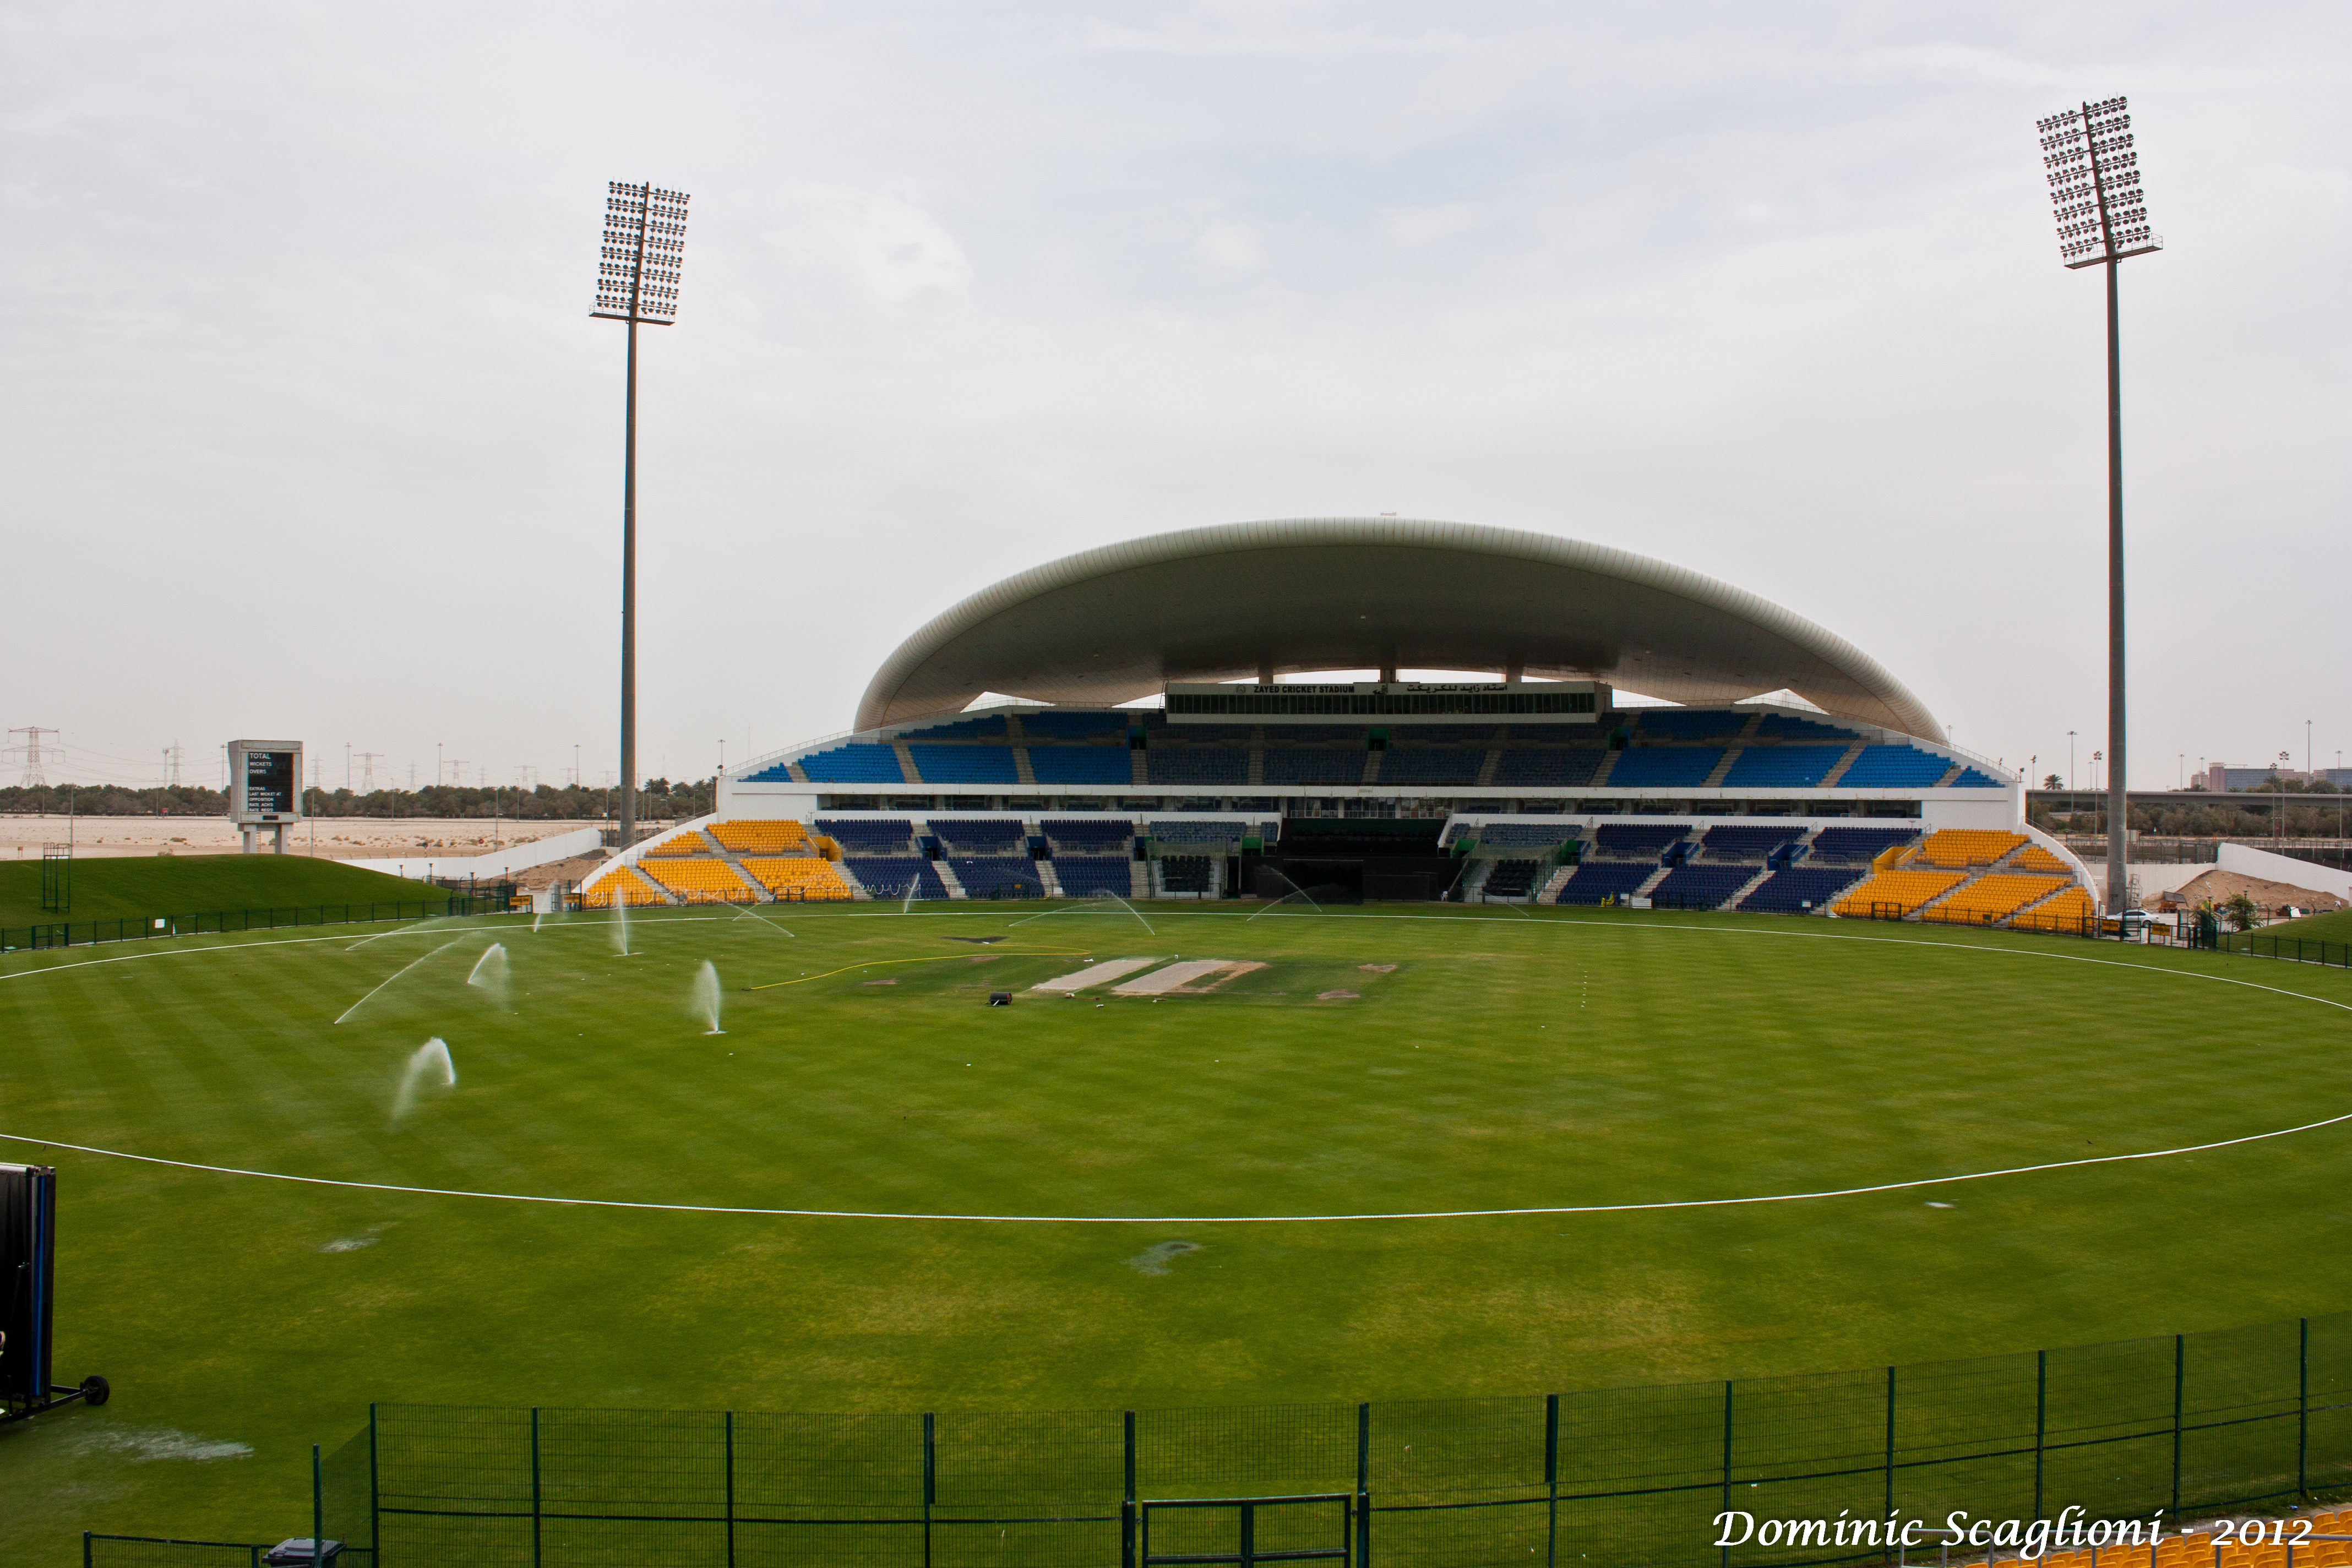 Venue for Asia Cup 2022 revealed